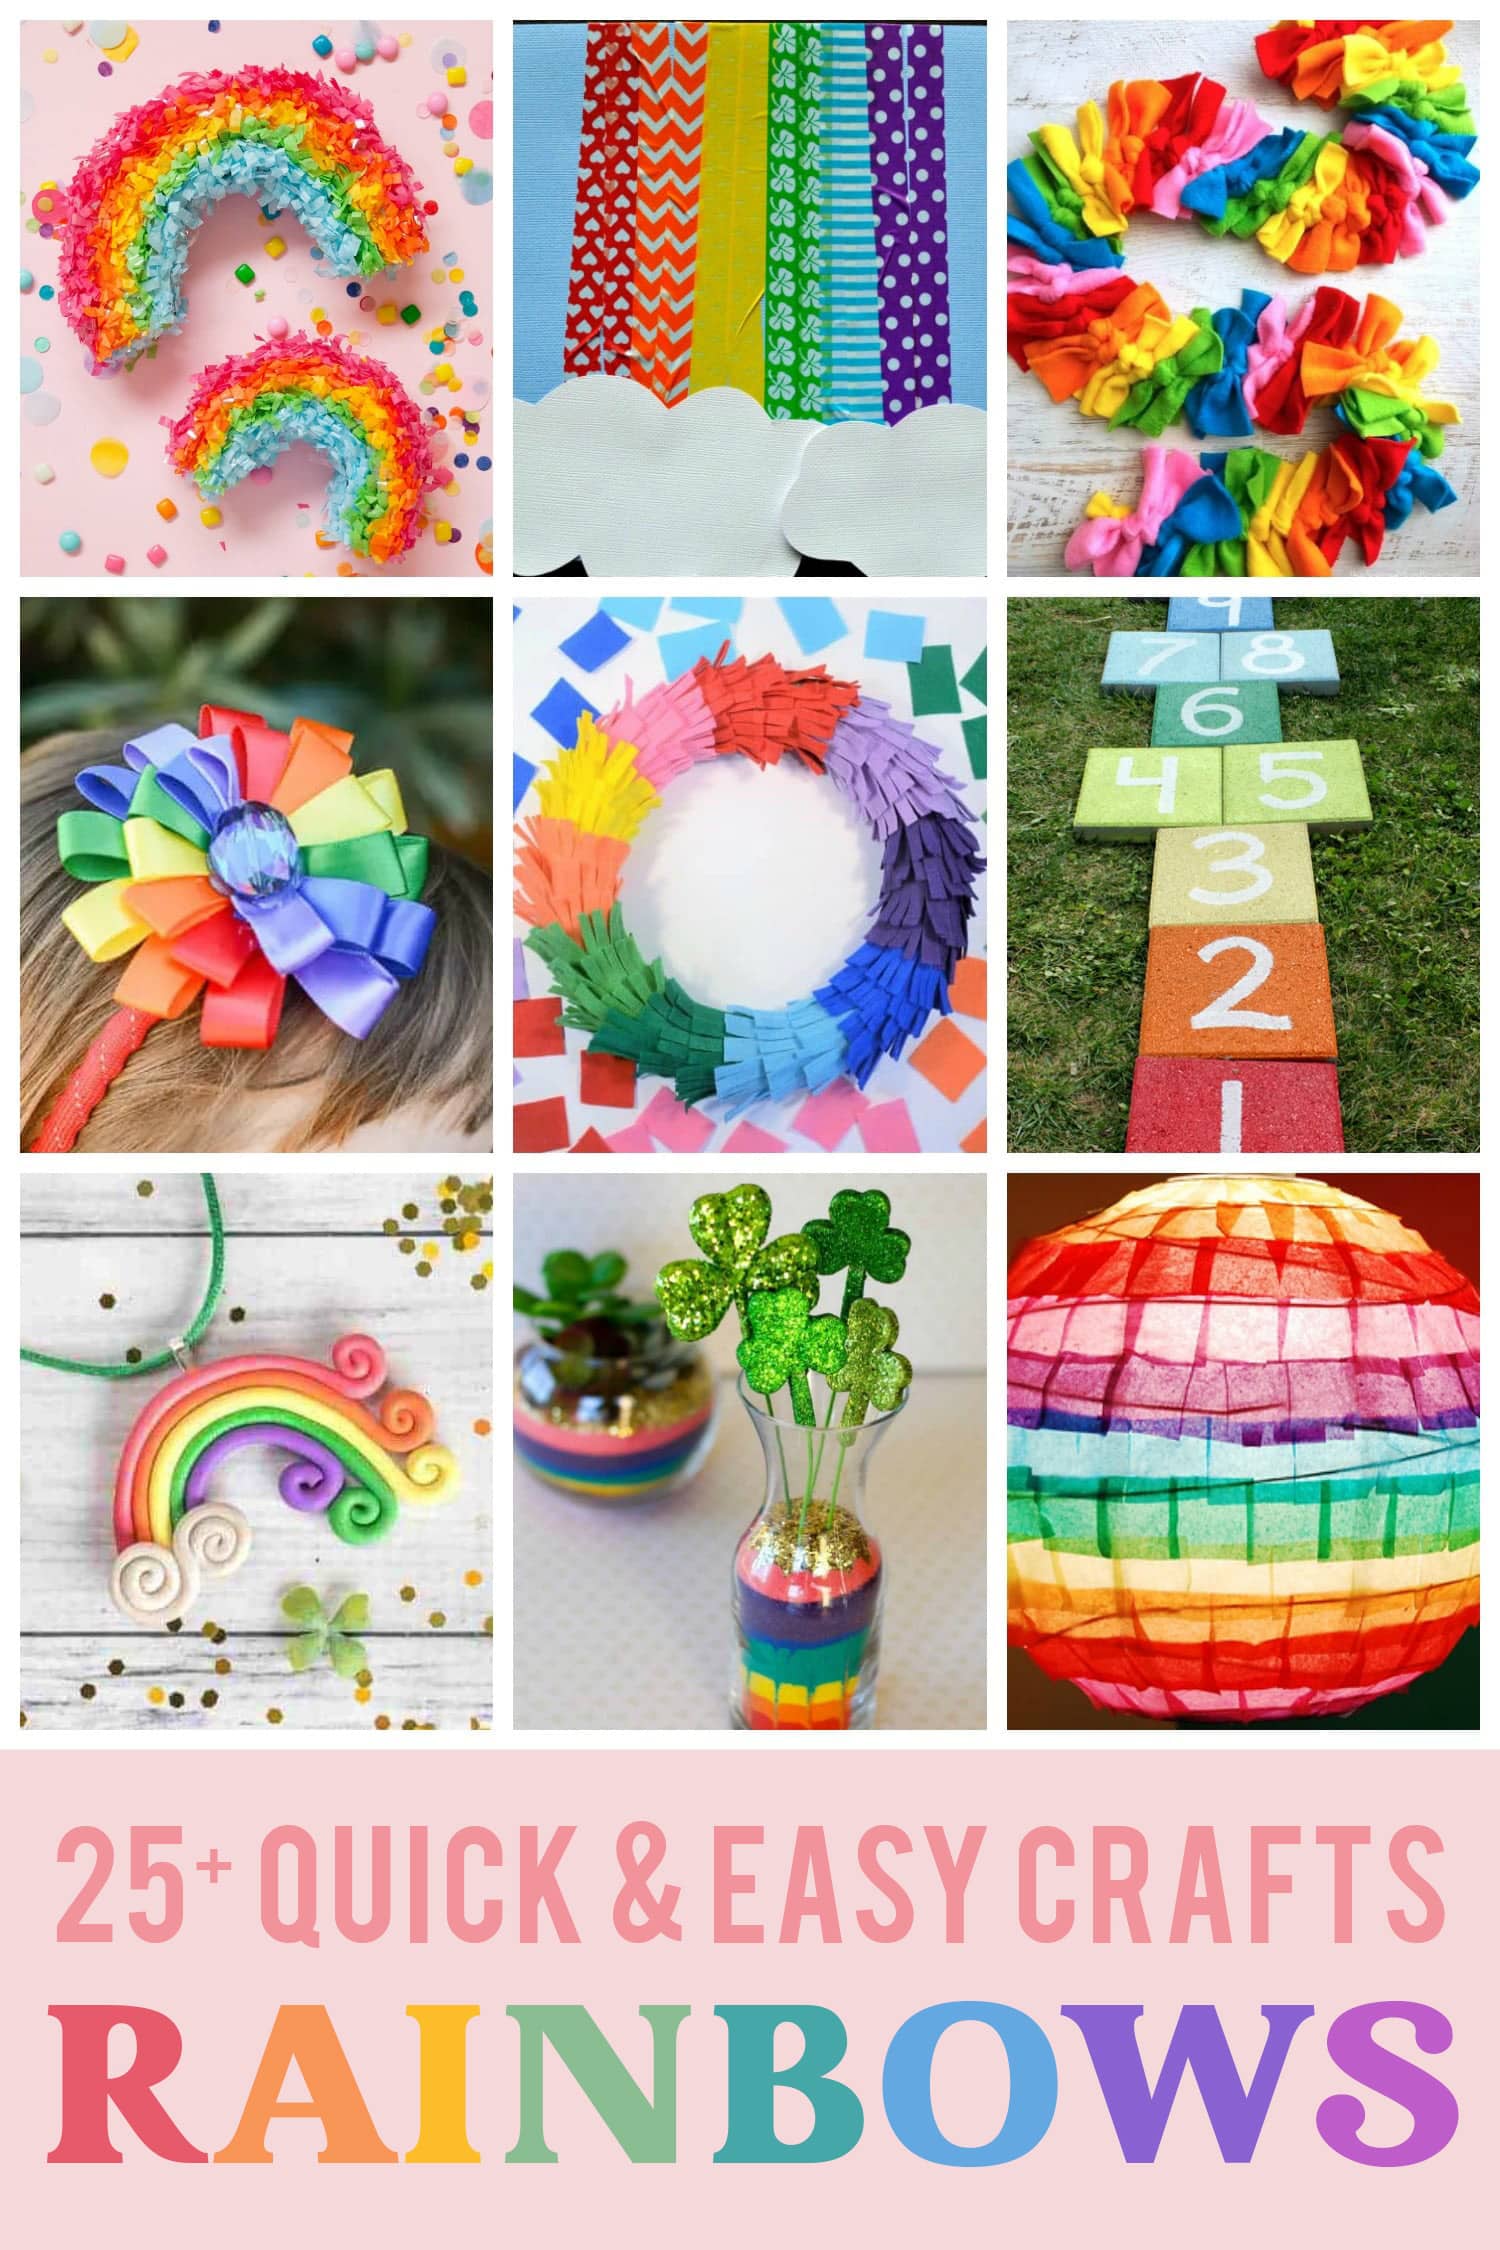 https://www.happinessishomemade.net/wp-content/uploads/2023/02/25-Quick-and-Easy-Rainbow-Crafts.jpg